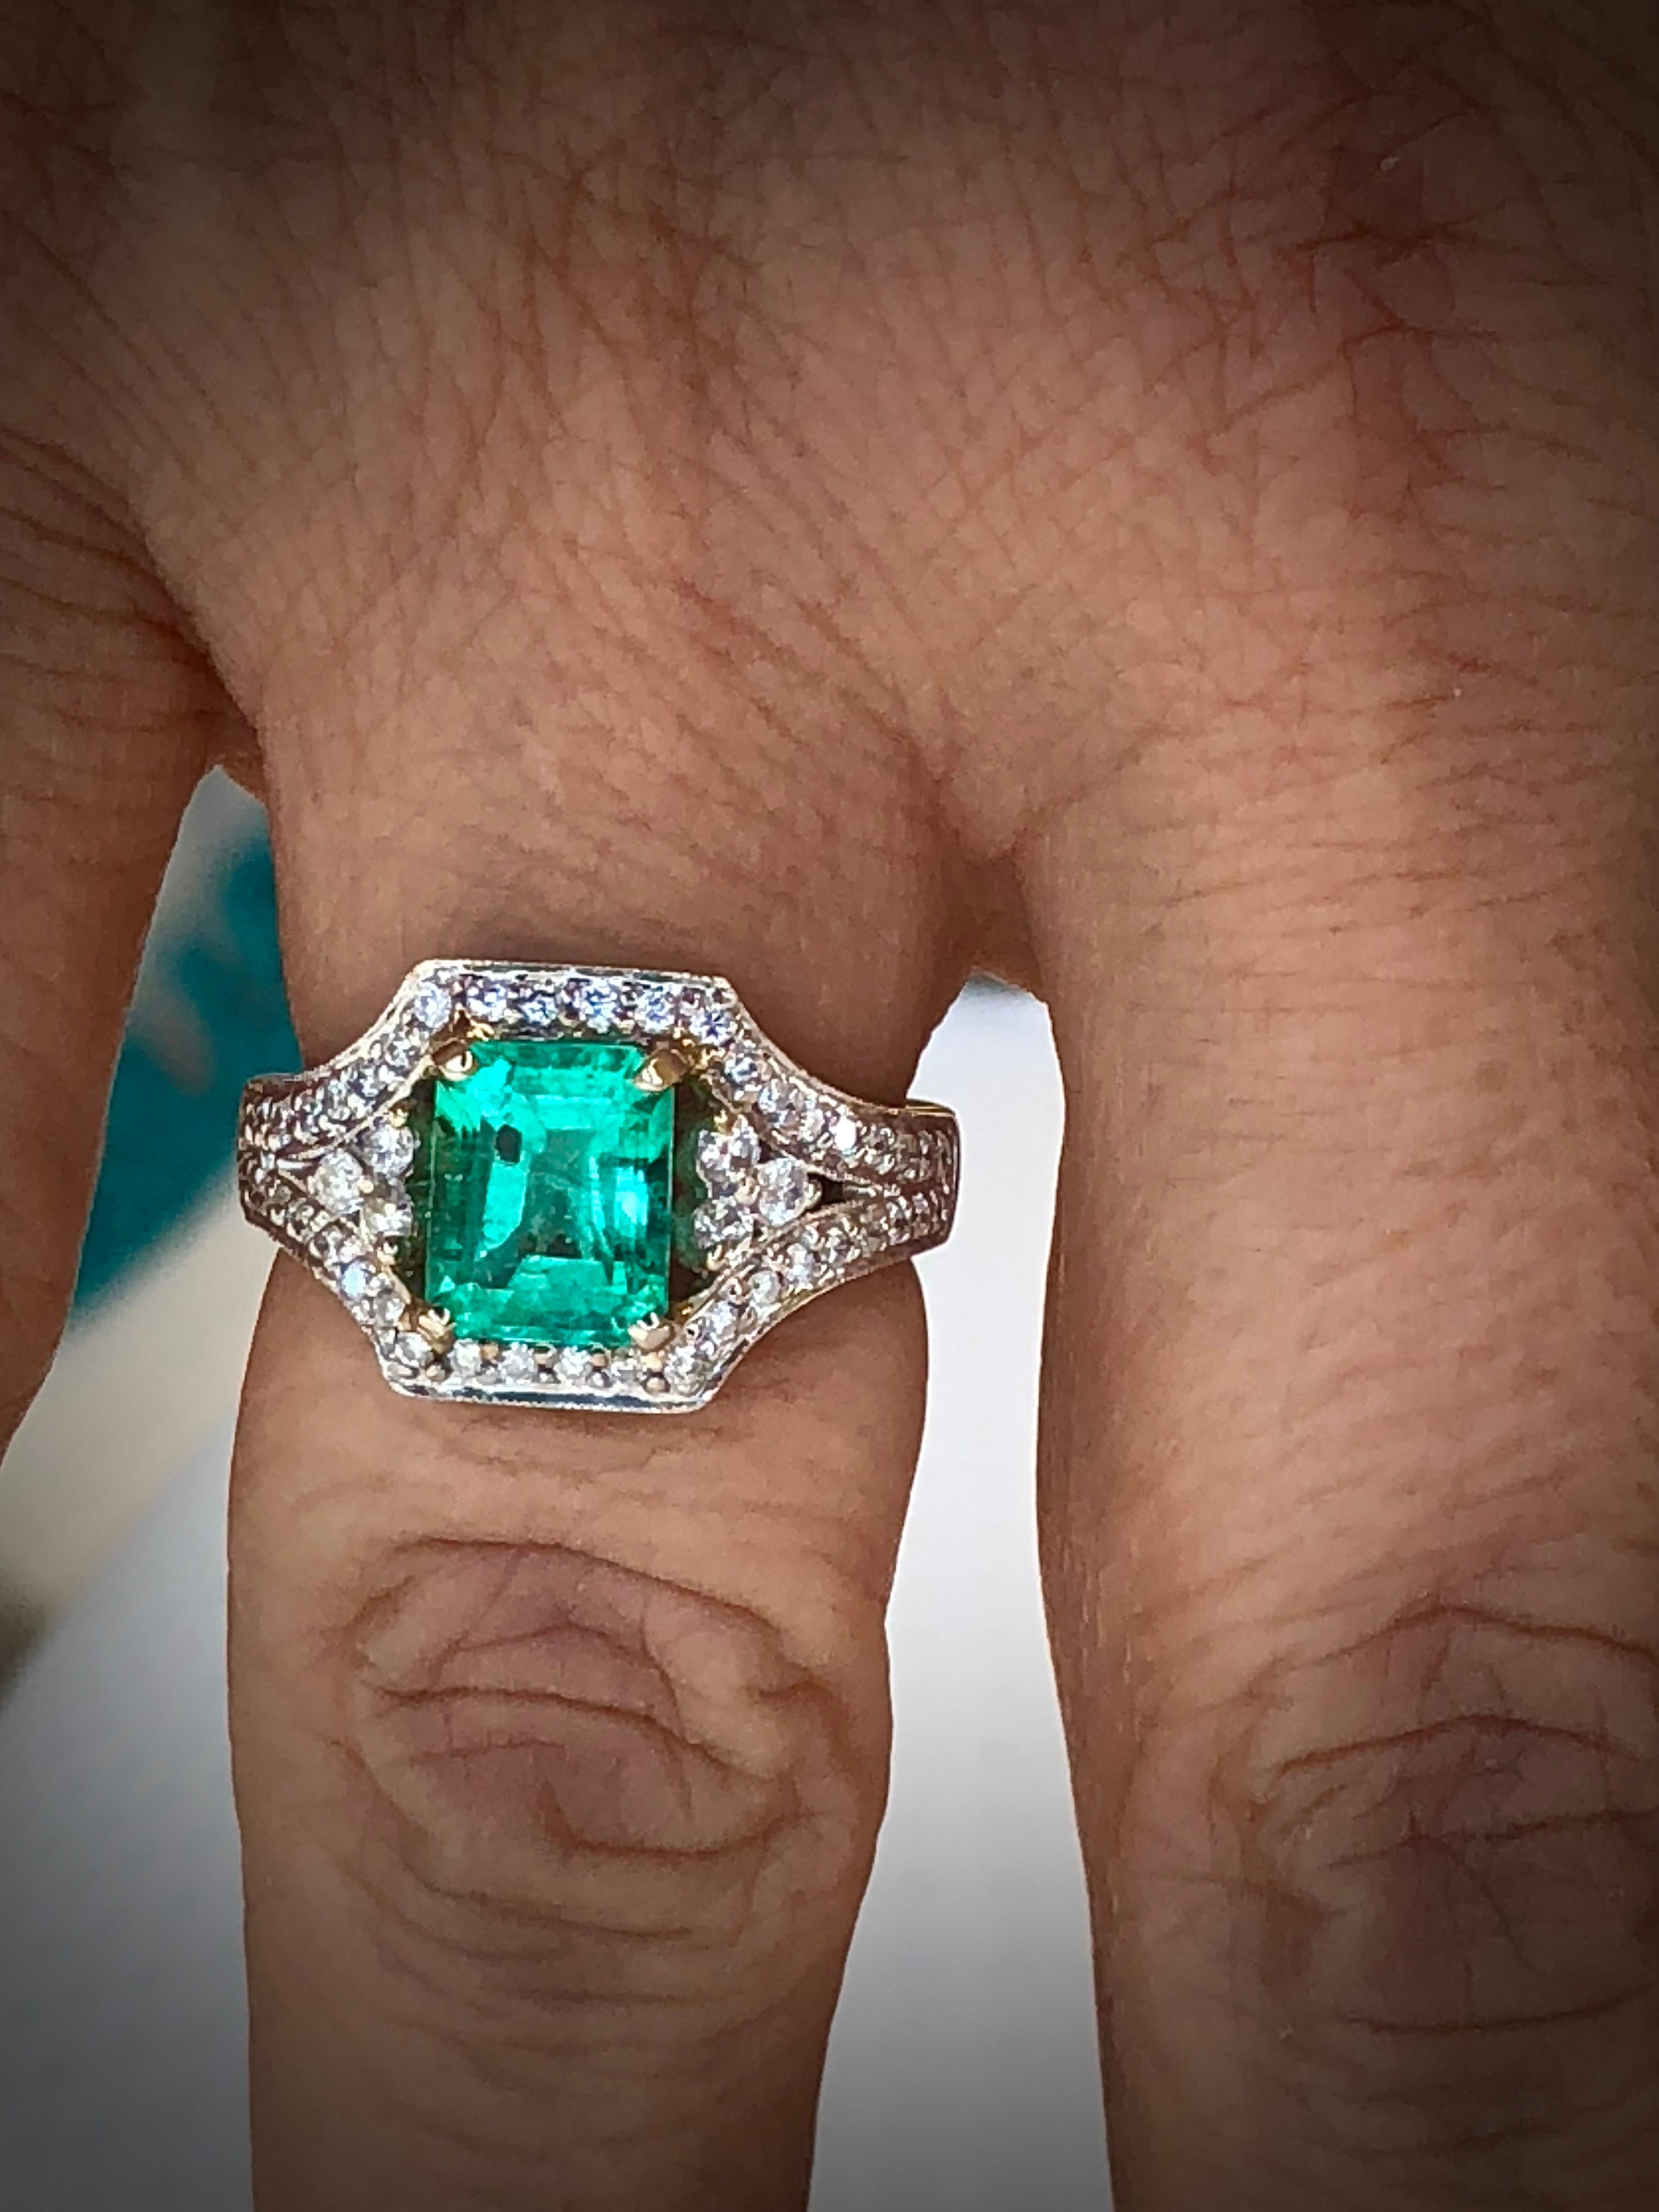 Vintage emerald engagement ring 100% natural Colombian emerald, emerald cut, medium-light green/ clarity VS, emerald weighting 2.25 carats, accented with diamonds 0.66cts G/SI2.
Total gemstones weight:  2.91 carats. solid, 18k white gold.
Ring